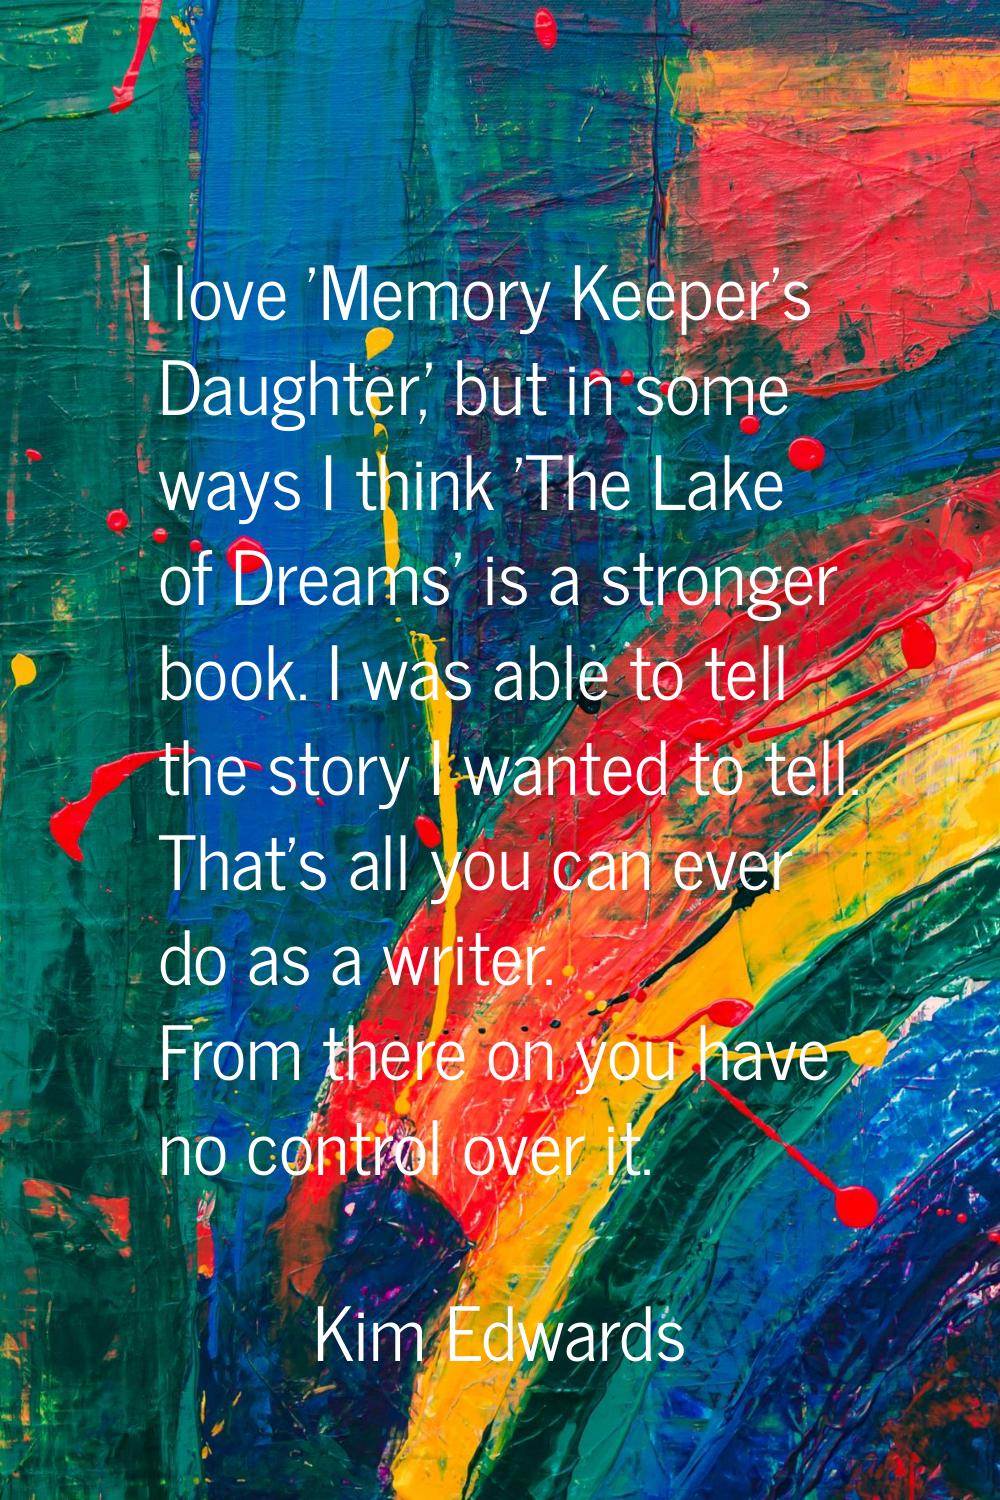 I love 'Memory Keeper's Daughter,' but in some ways I think 'The Lake of Dreams' is a stronger book